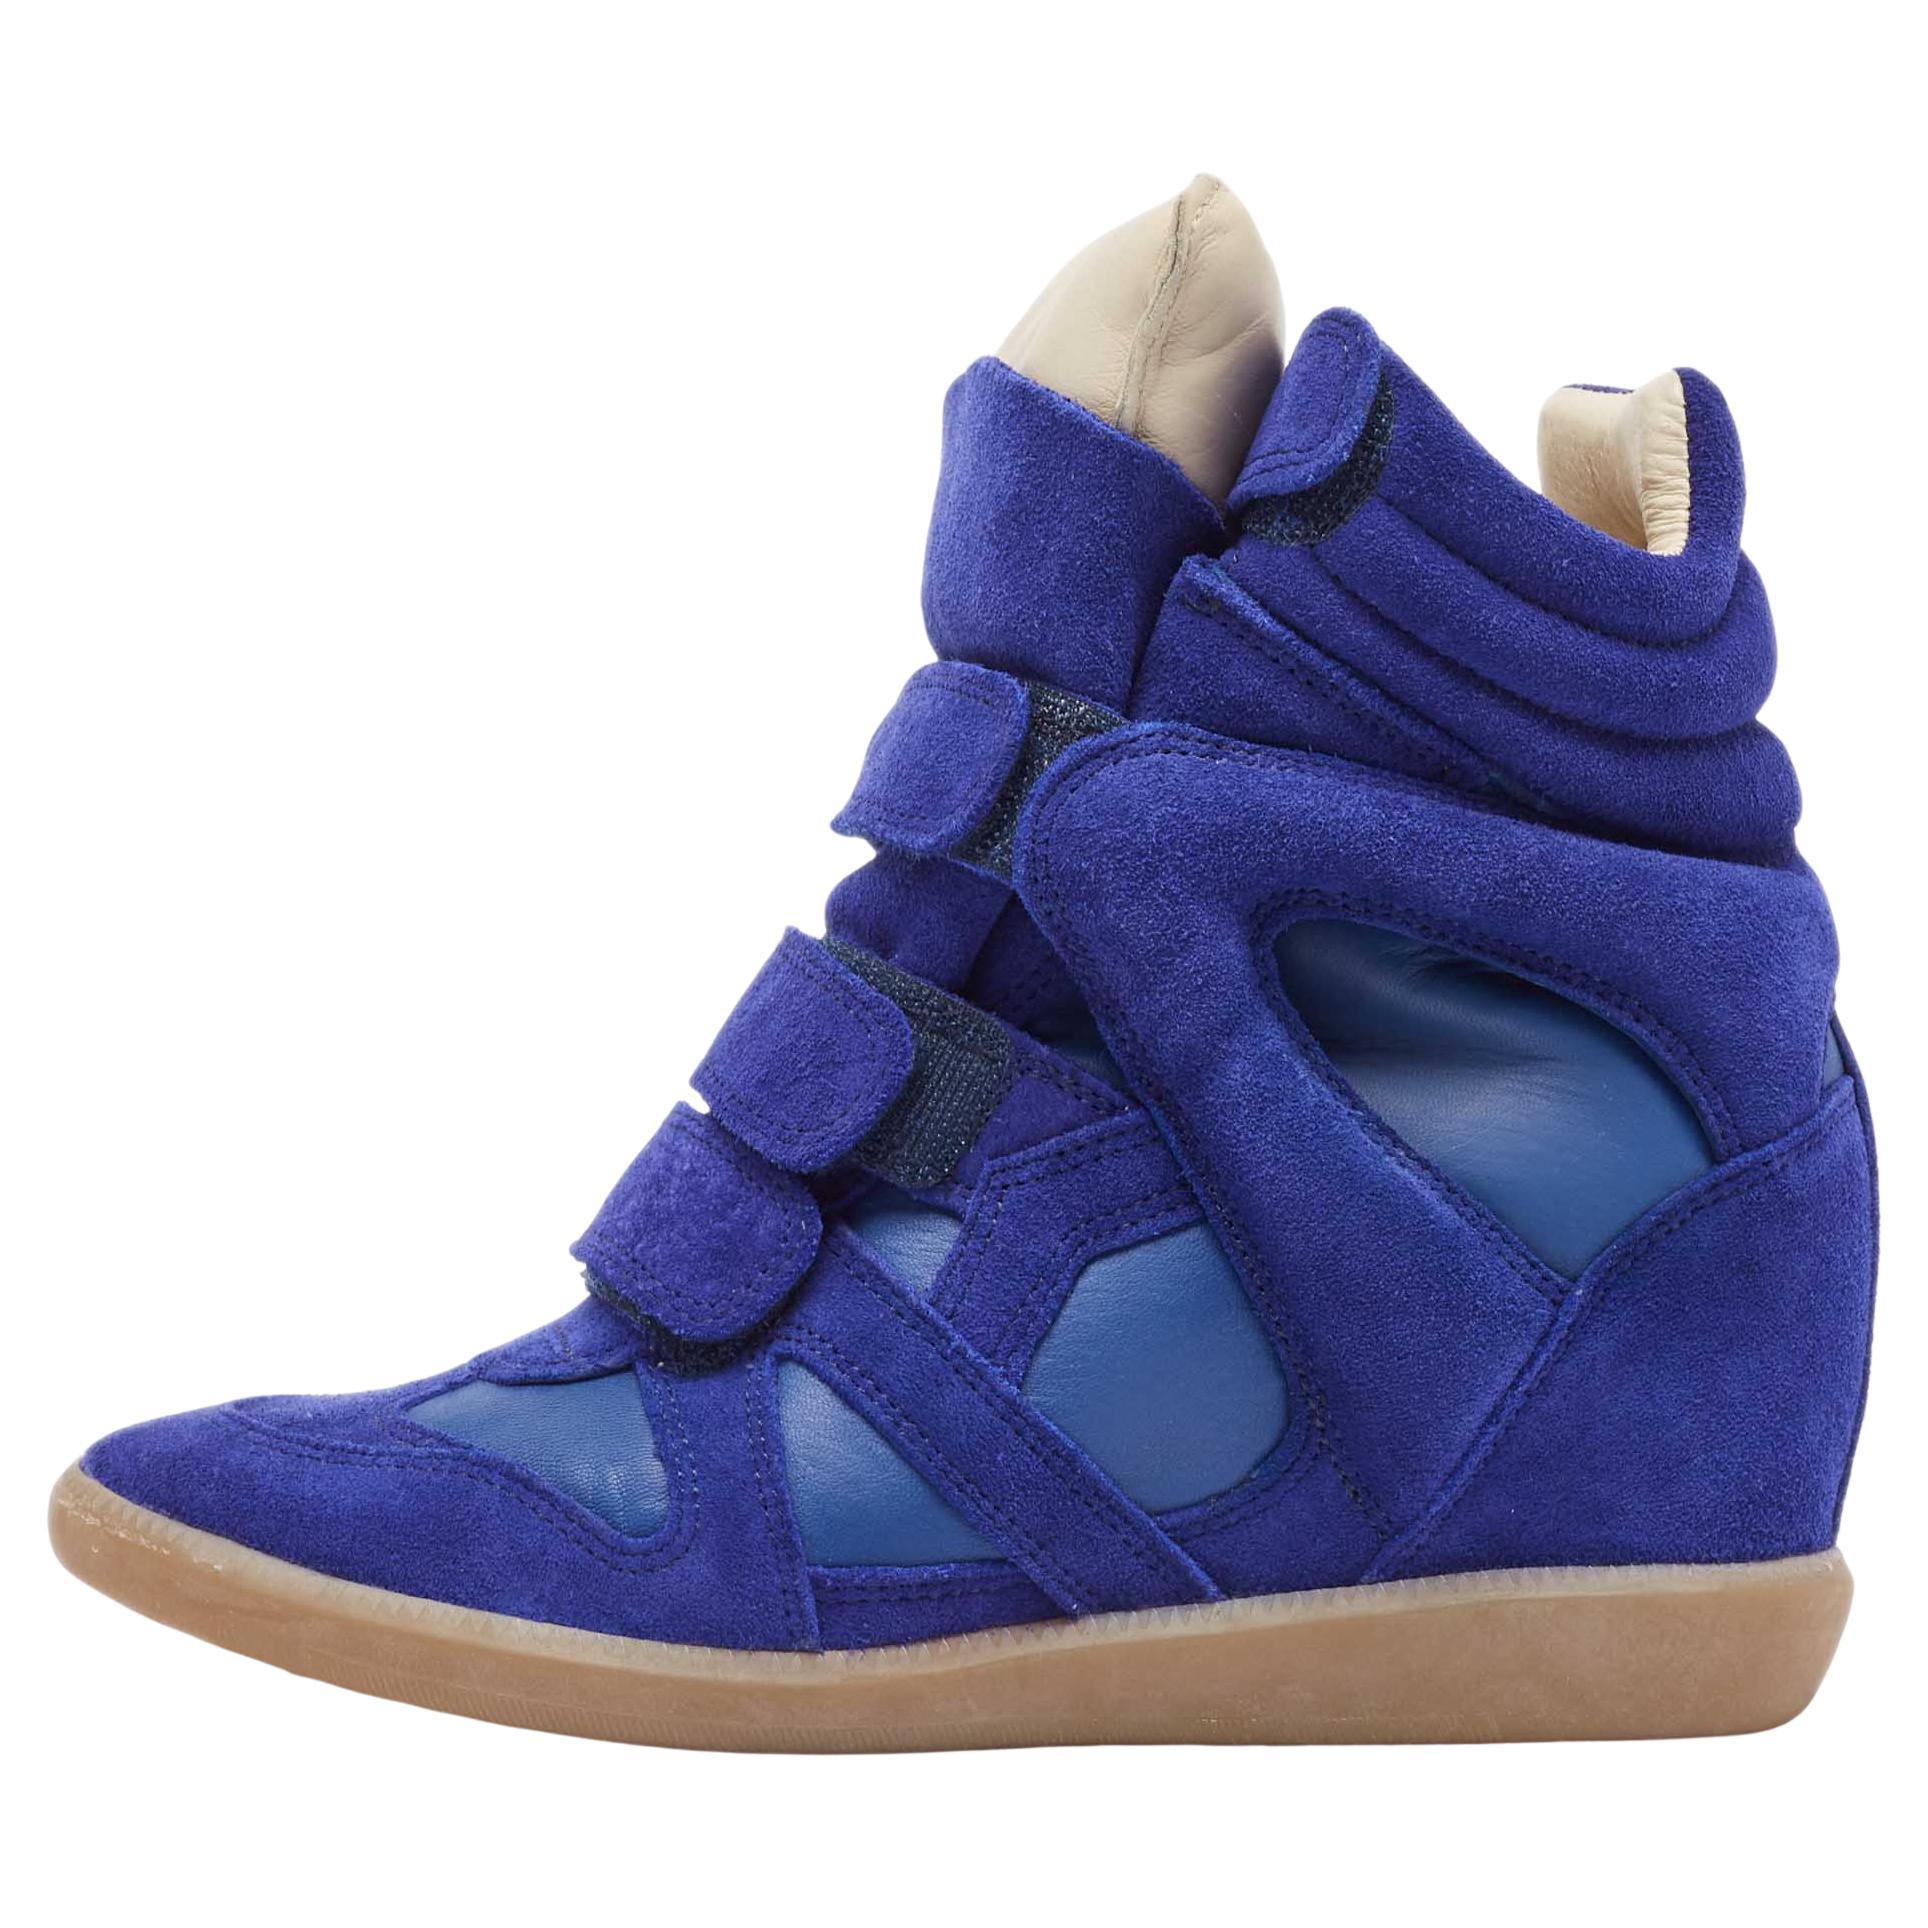 Isabel Marant Blue Suede and Leather Bekett Wedge Sneakers Size 38 For Sale